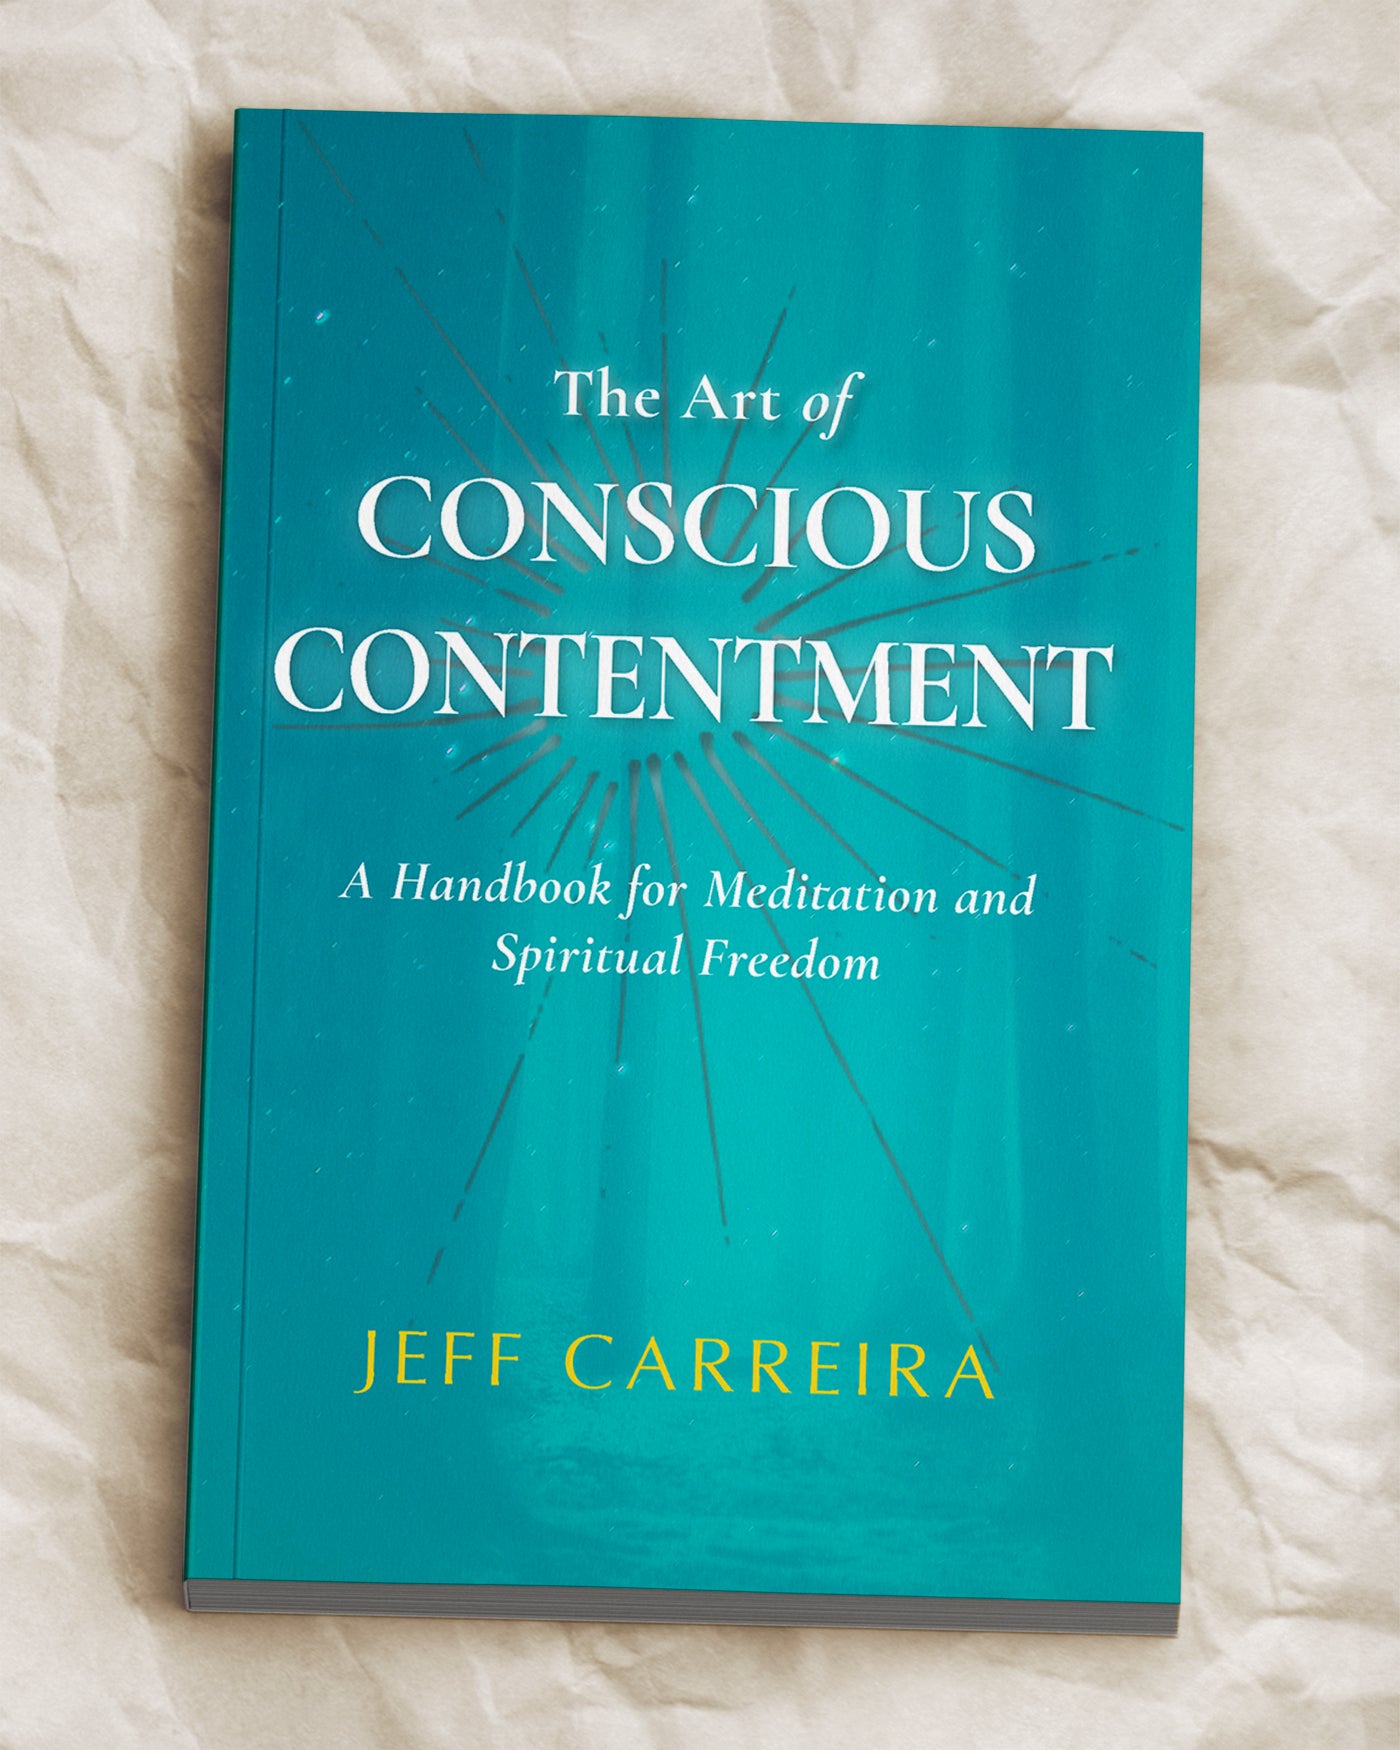 The Art of Conscious Contentment: A Handbook for Meditation and Spiritual Freedom